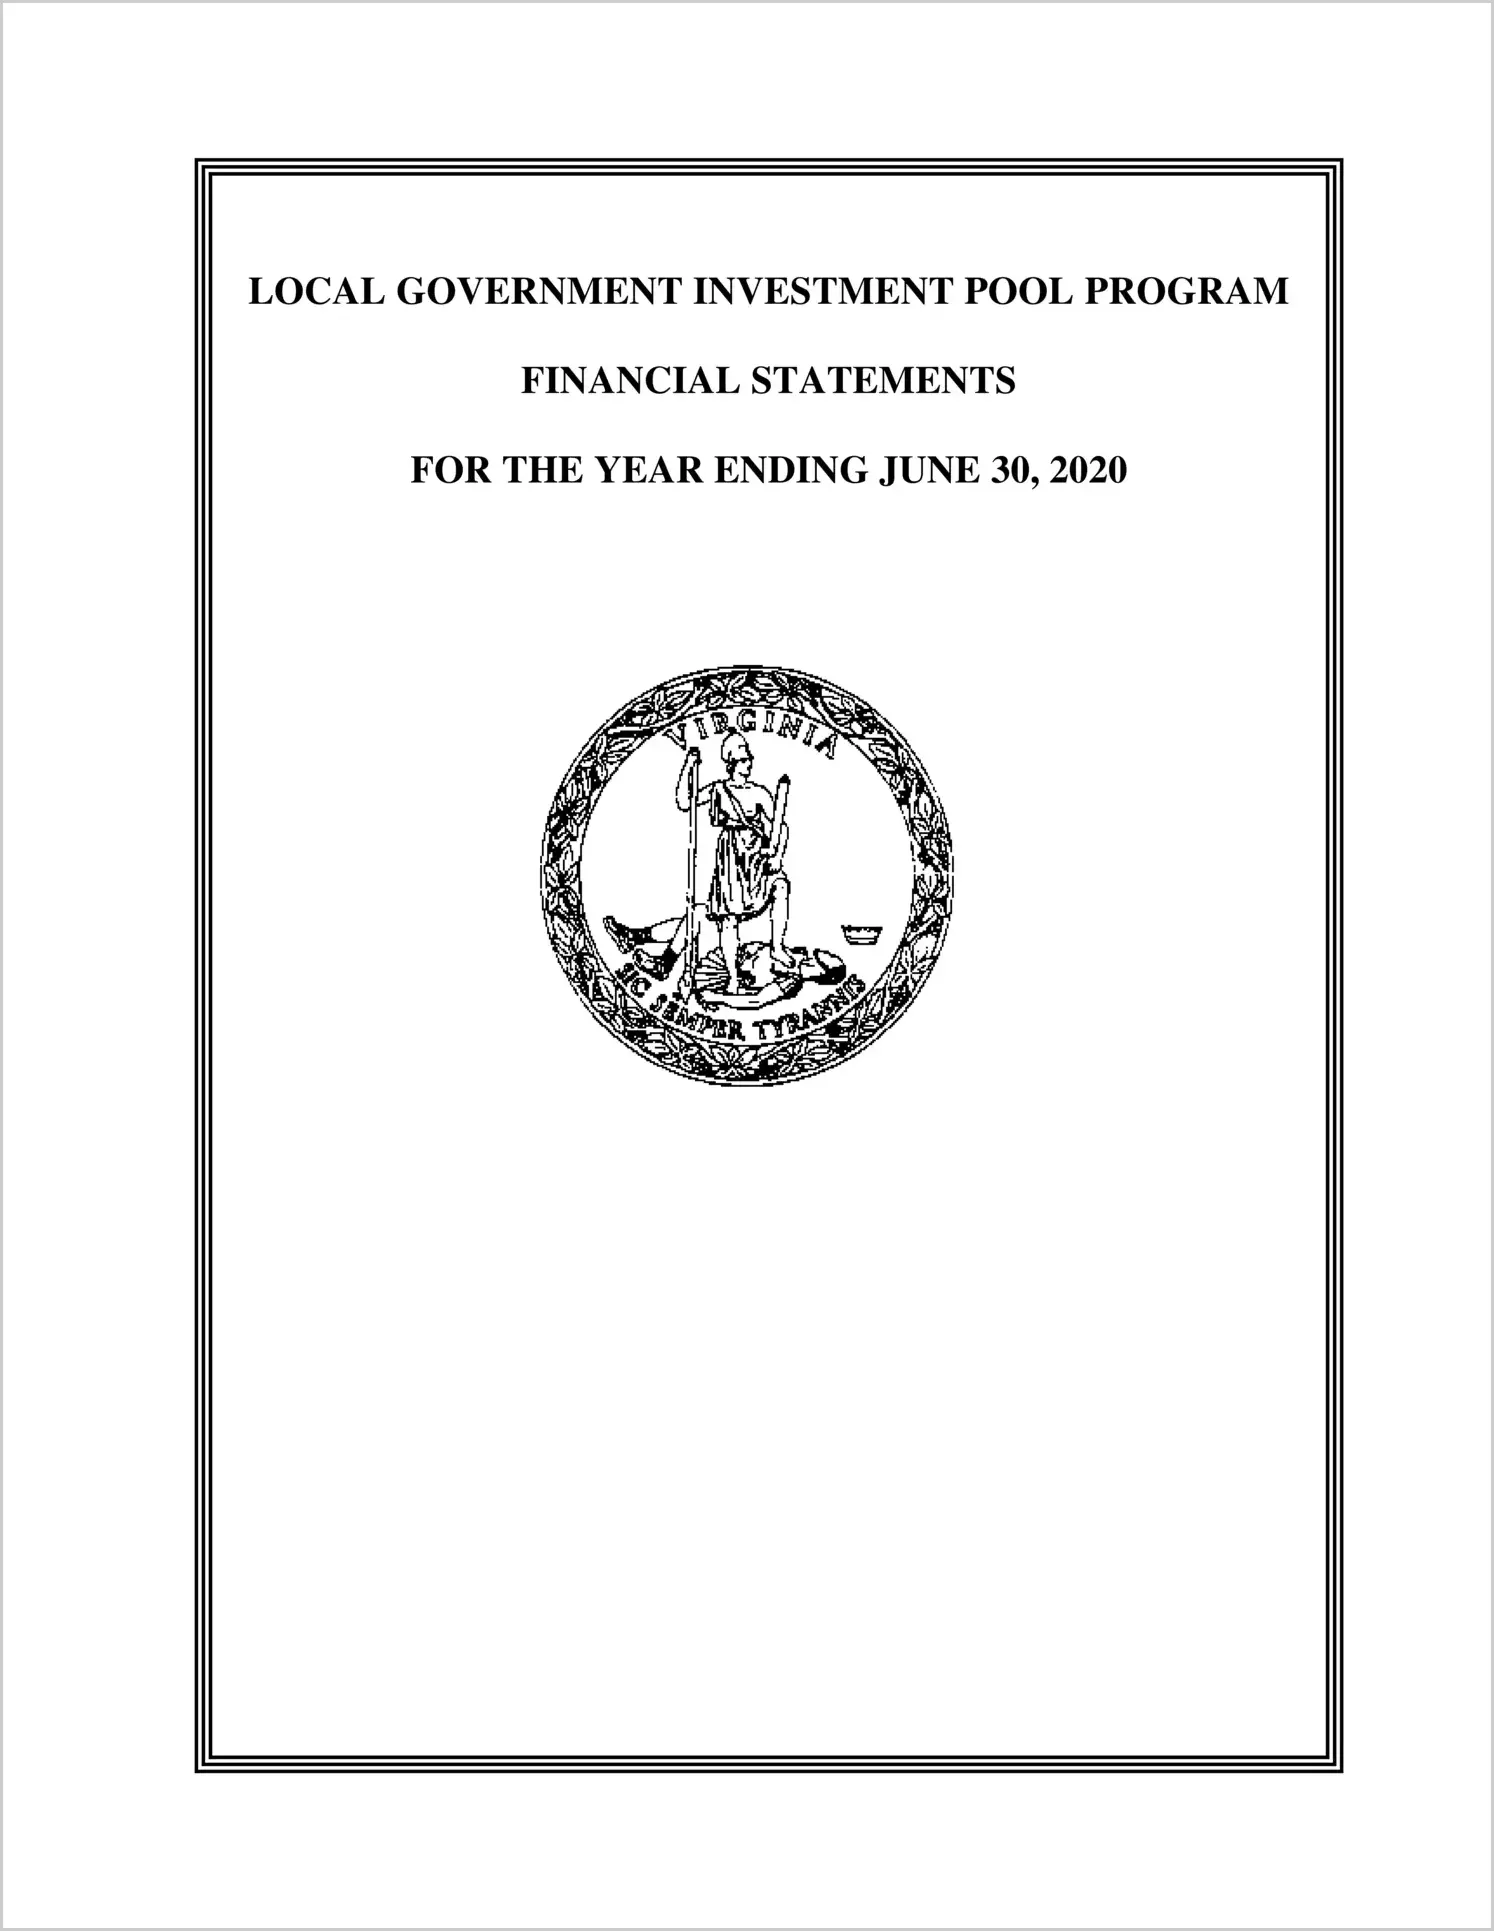 Local Government Investment Pool Financial Statements for the year ended June 30, 2020